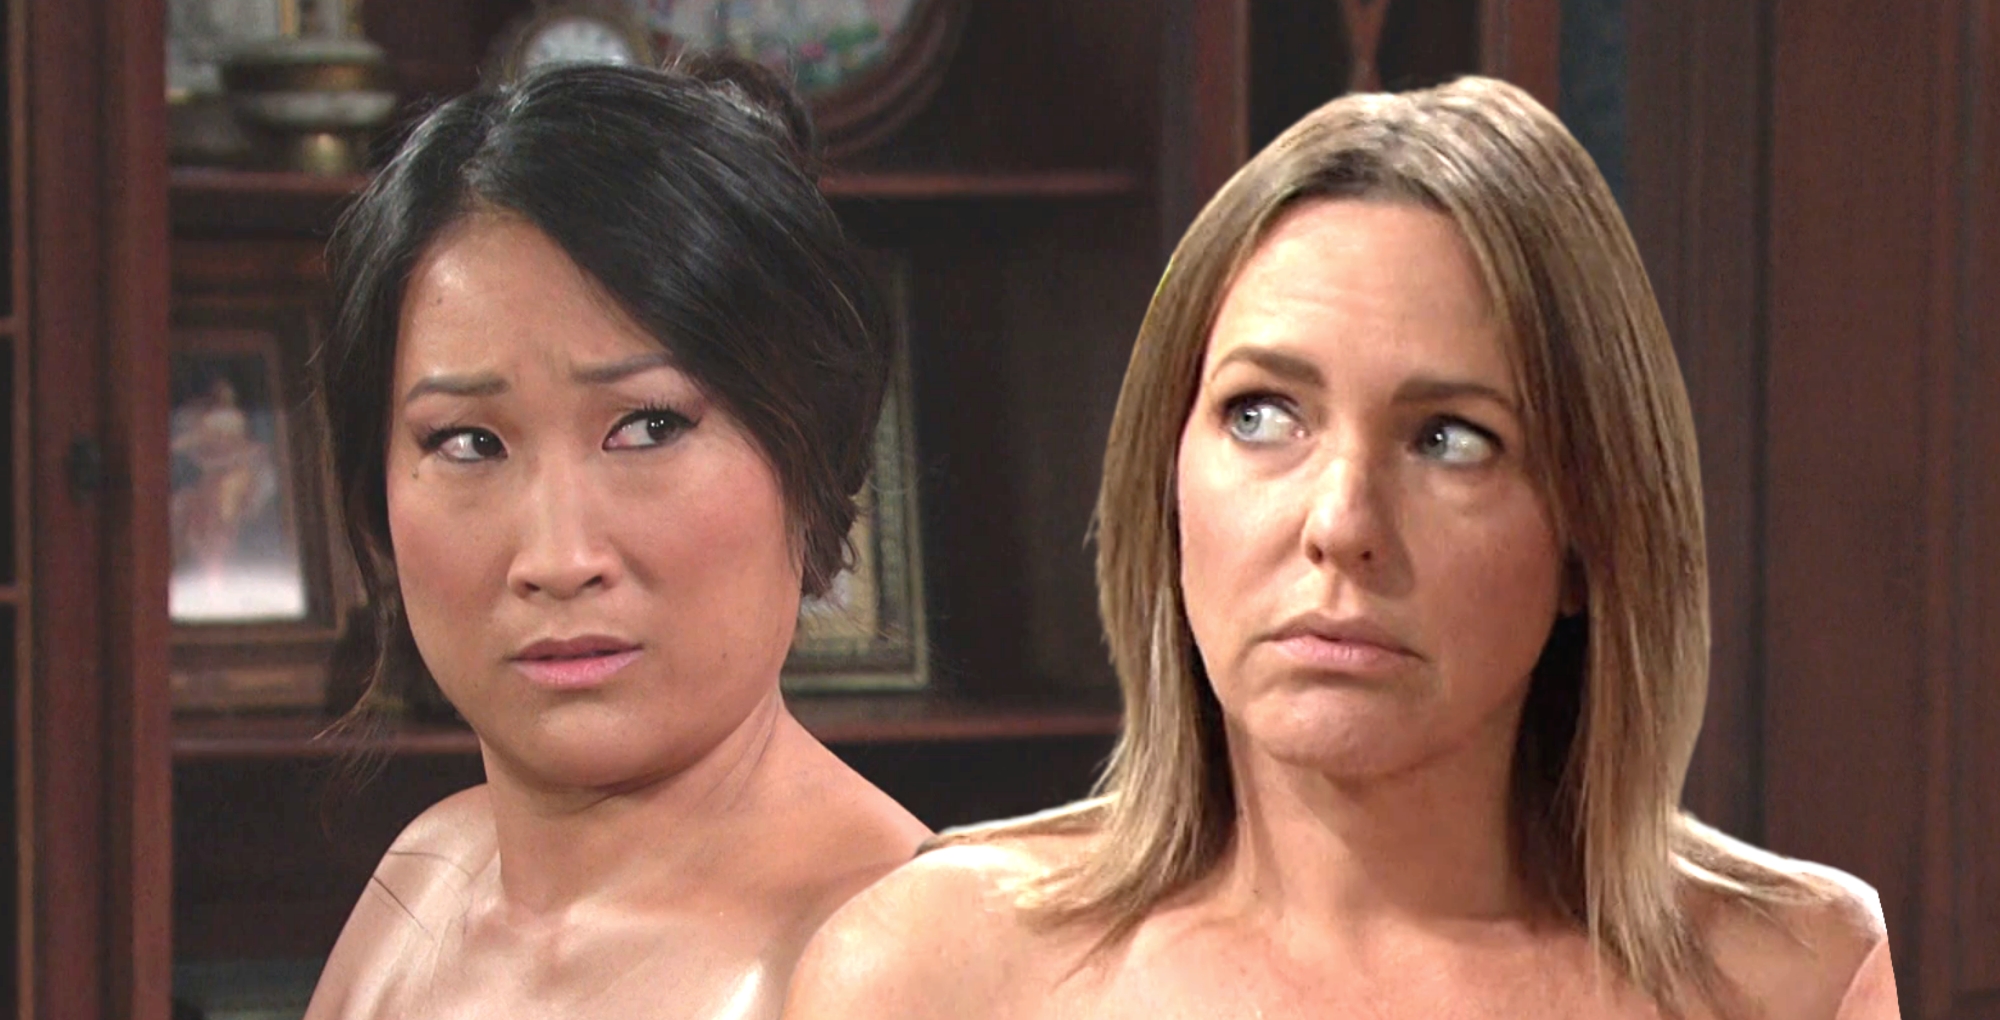 days of our lives left a naked melinda trask and nicole walker...could someone end up pregnant.